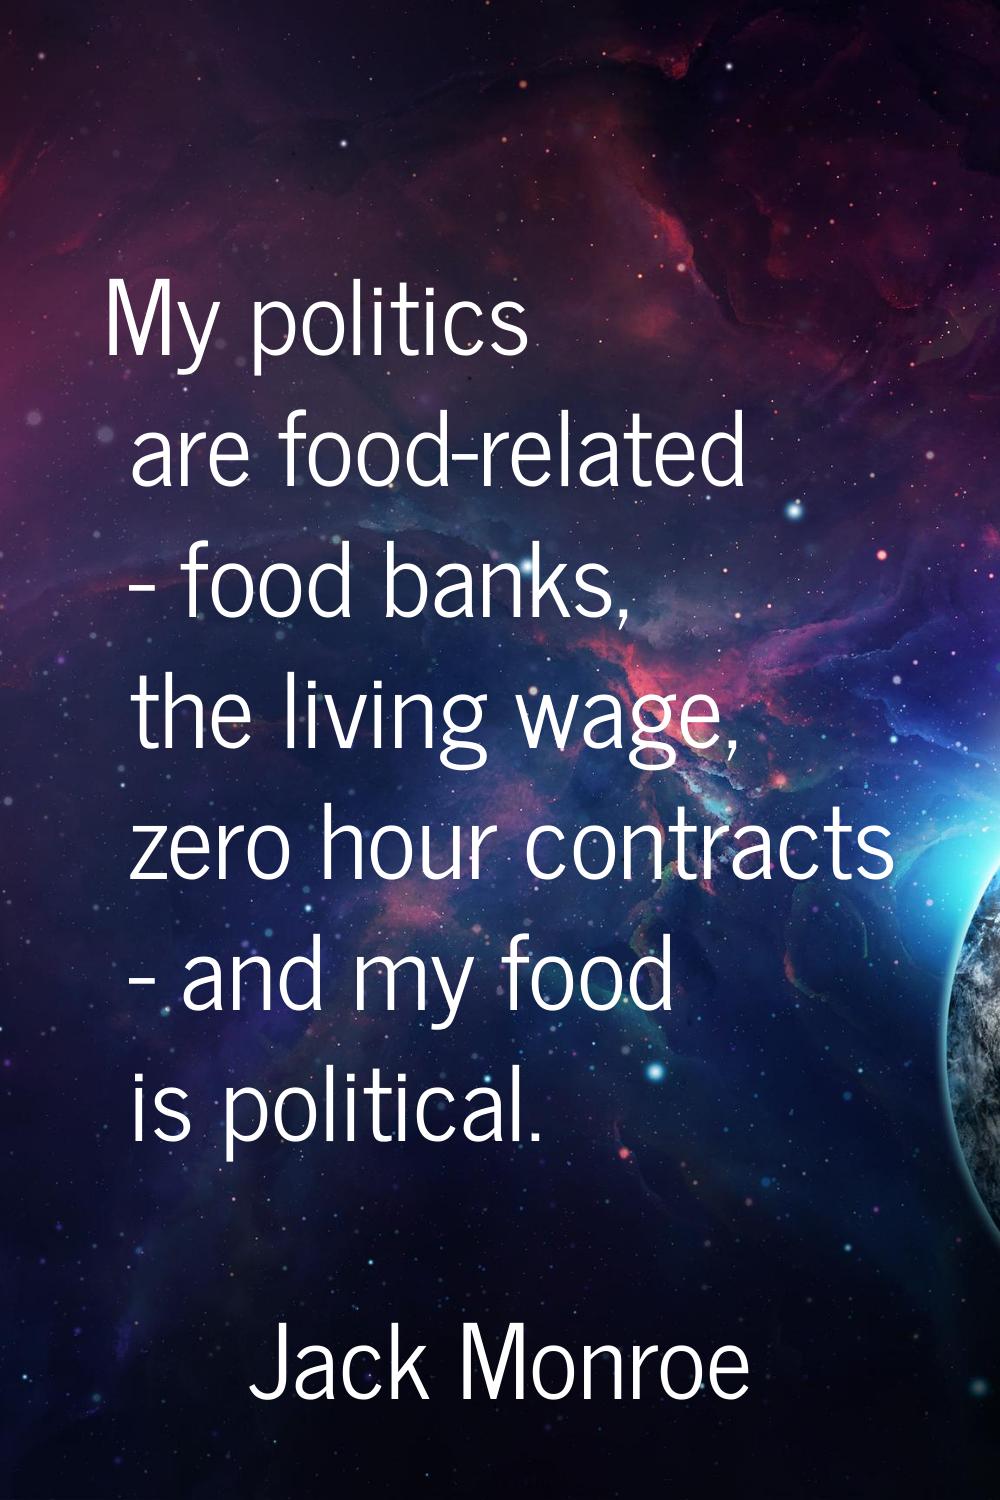 My politics are food-related - food banks, the living wage, zero hour contracts - and my food is po